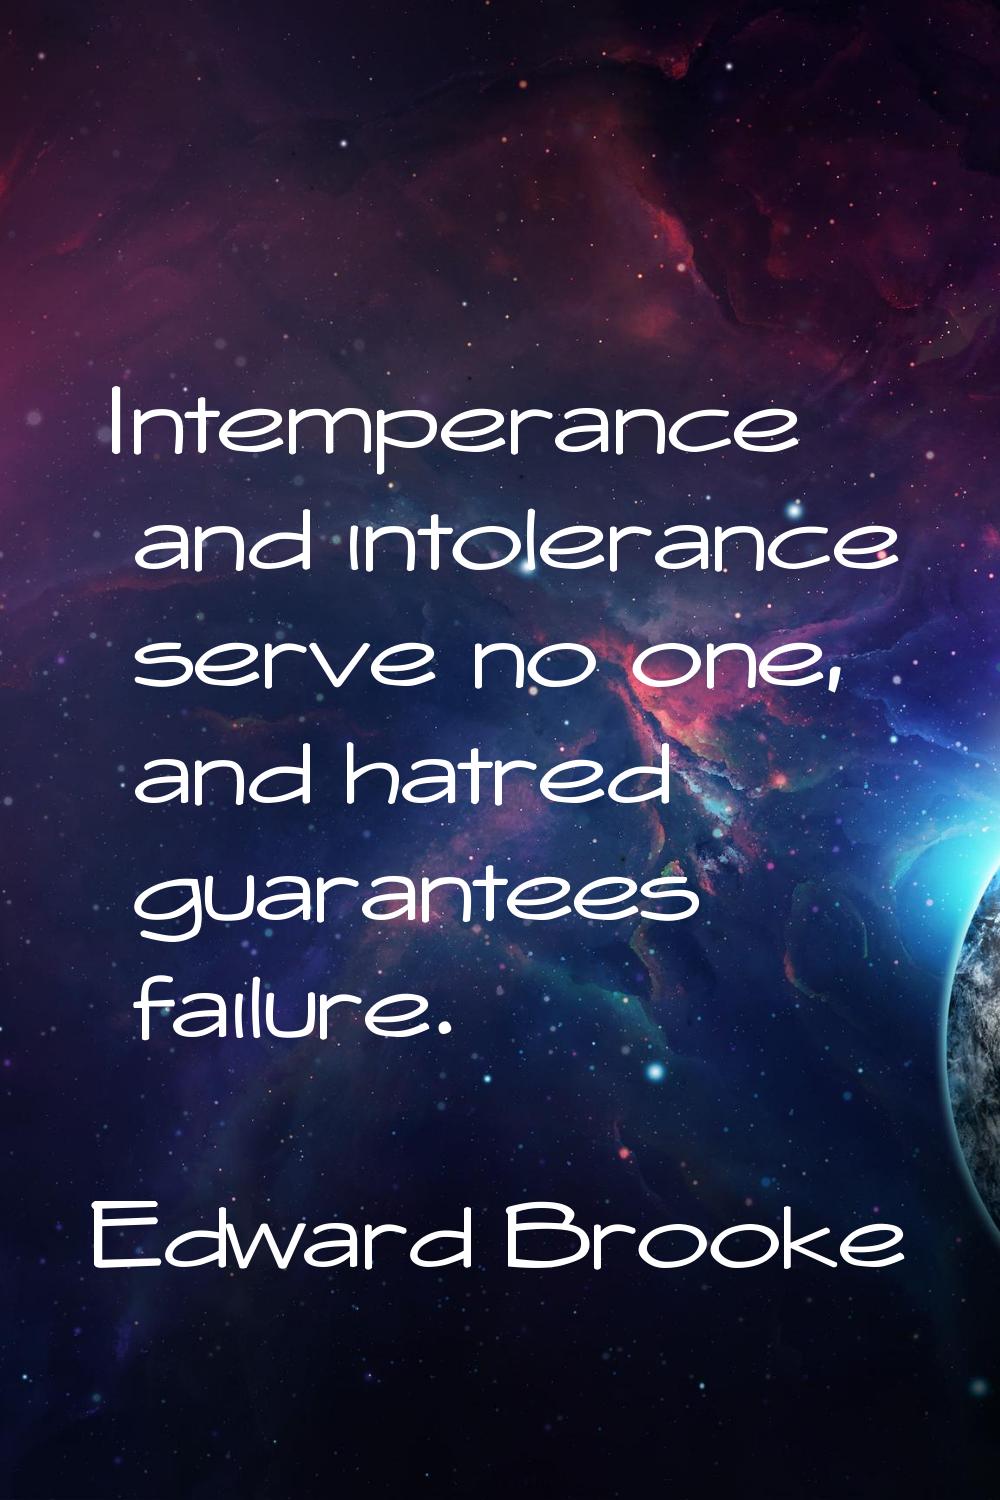 Intemperance and intolerance serve no one, and hatred guarantees failure.